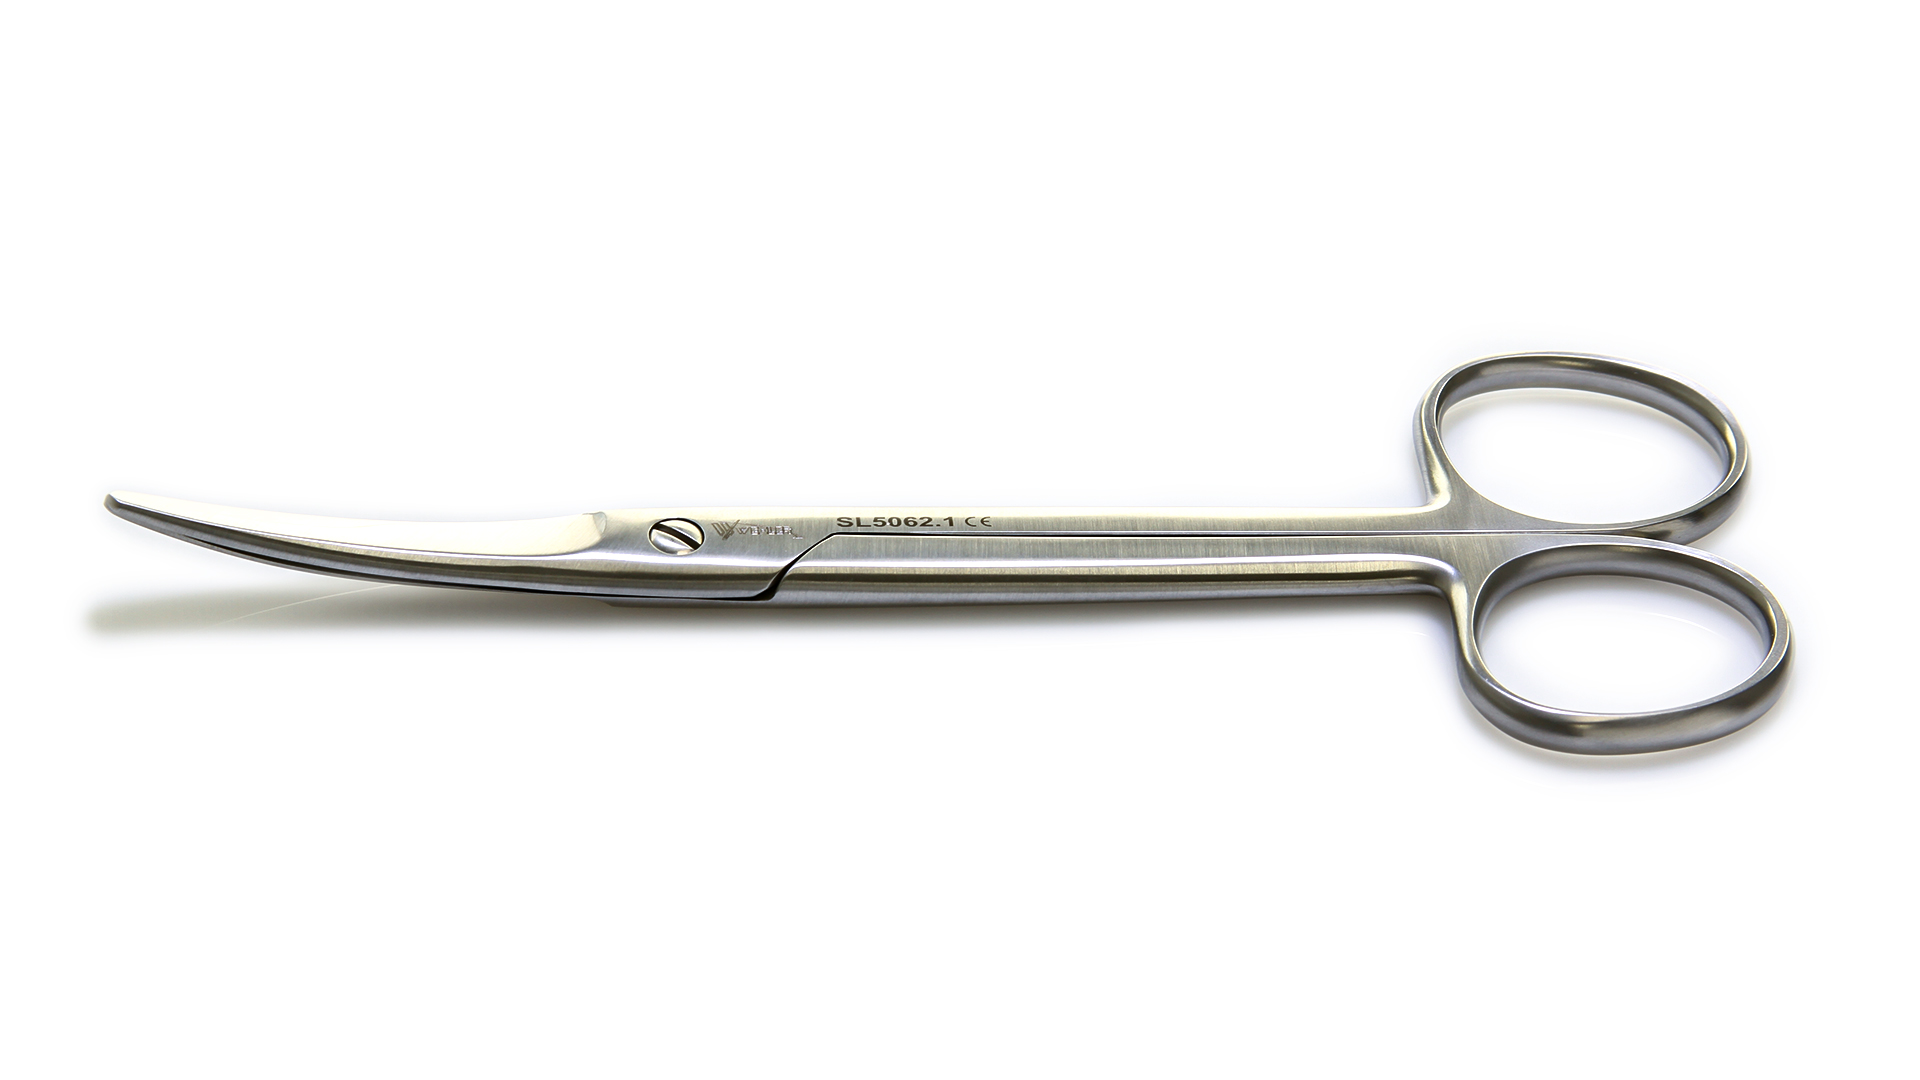 Curved Mayo Scissors - 6 3/4 in